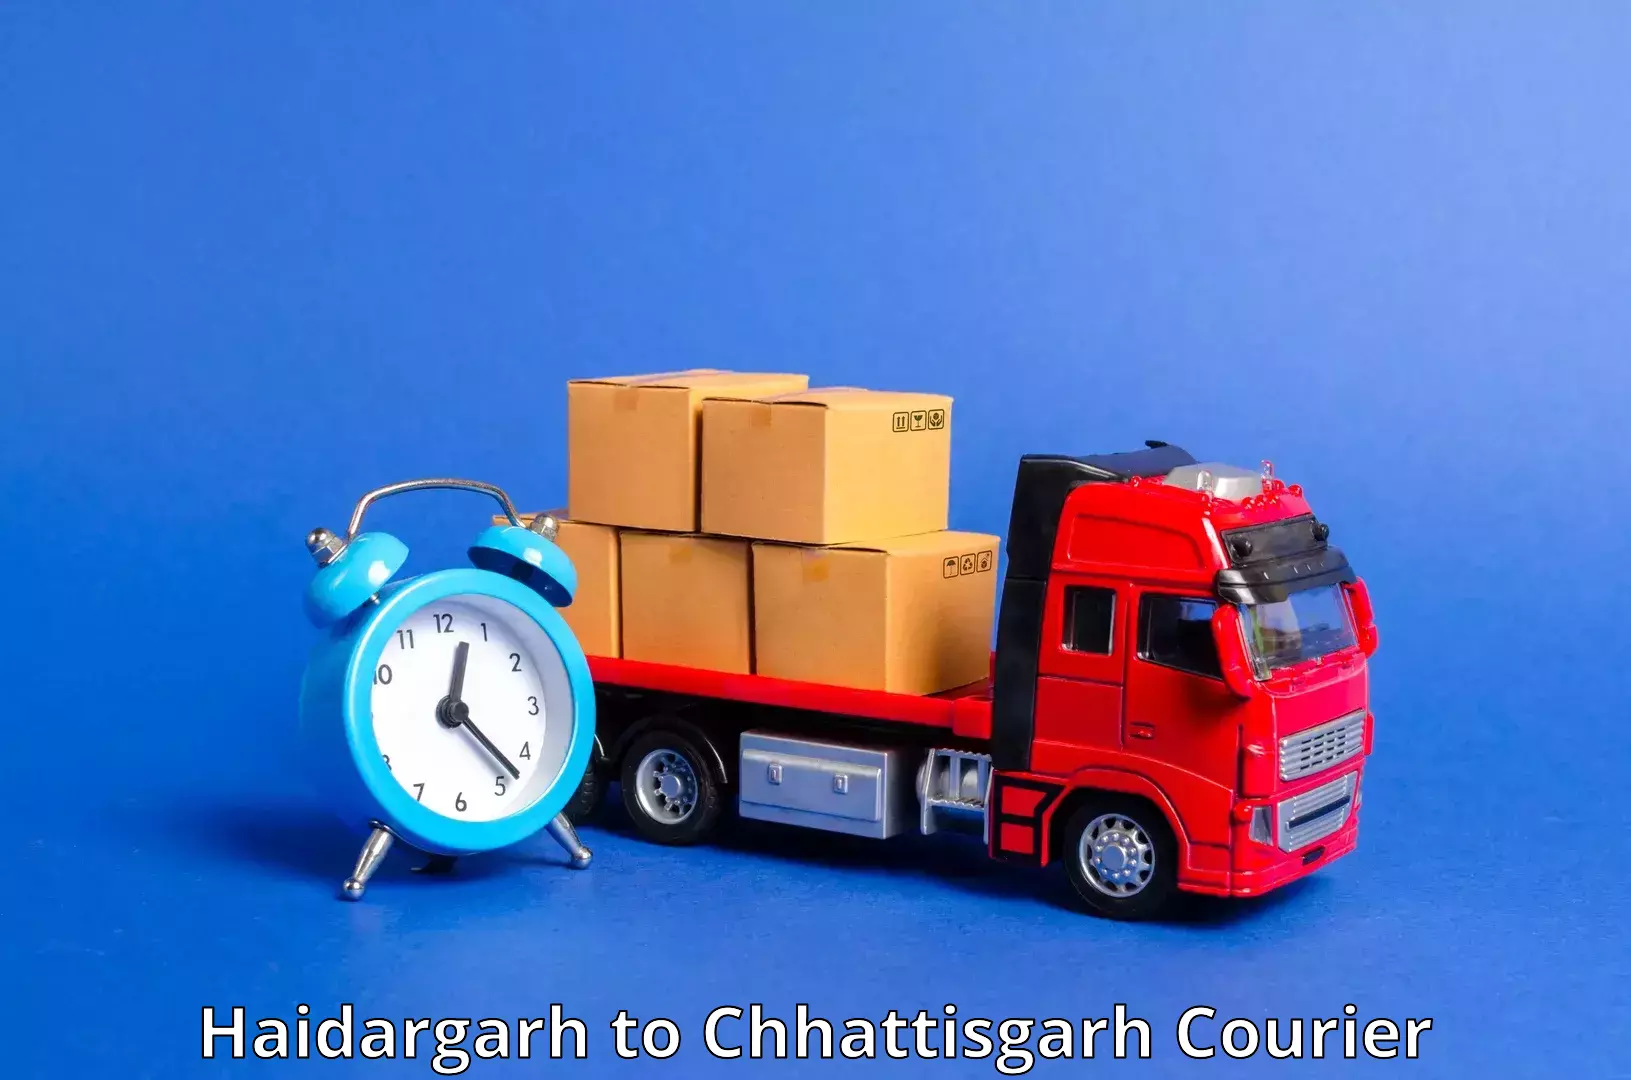 Secure package delivery Haidargarh to Mahasamund